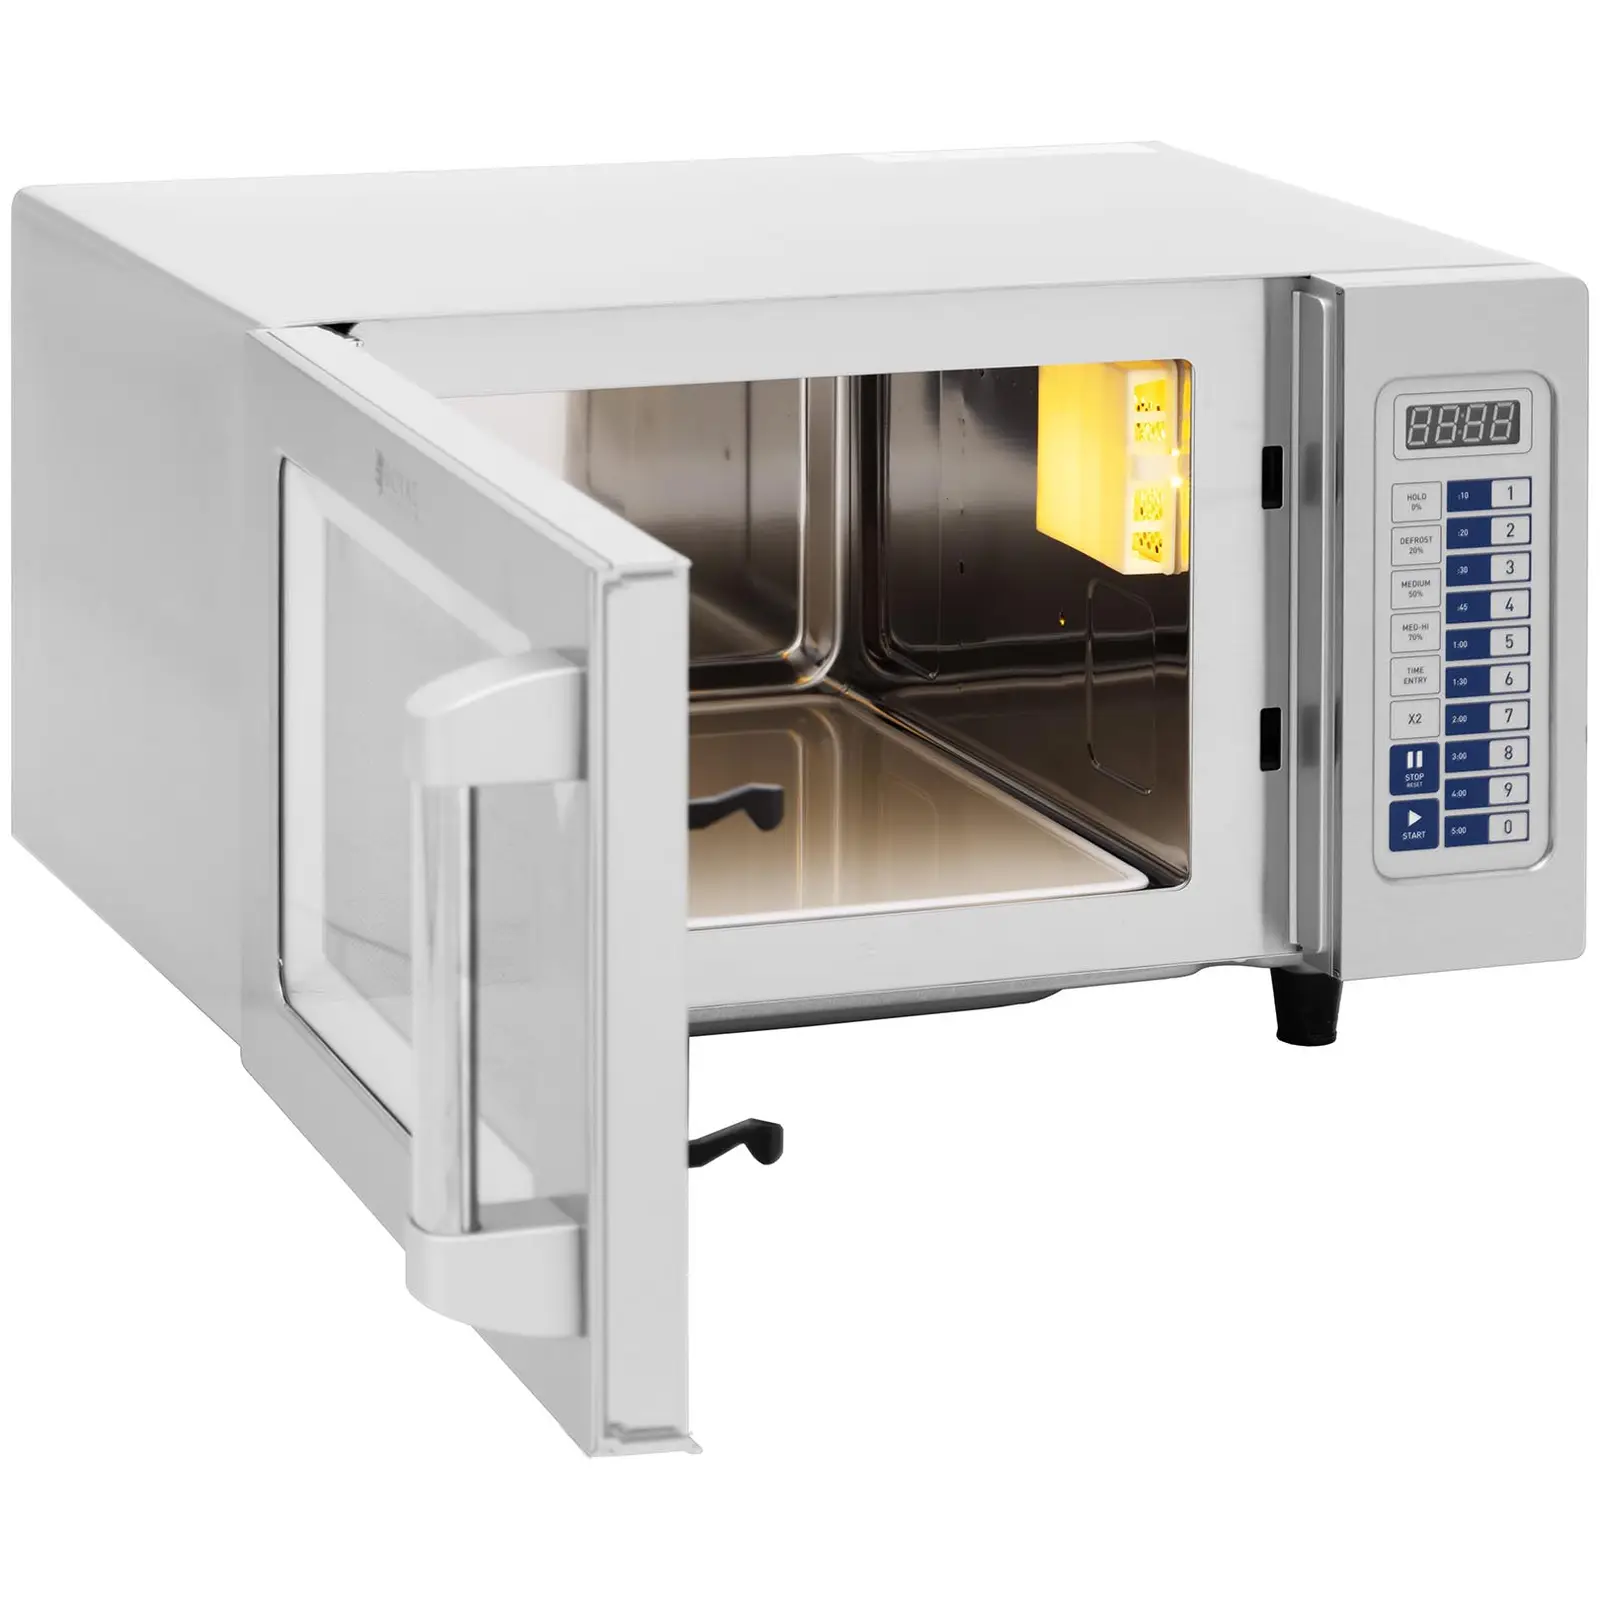 Gastro-Mikrowelle - 1550 W - 25 L - Royal Catering 